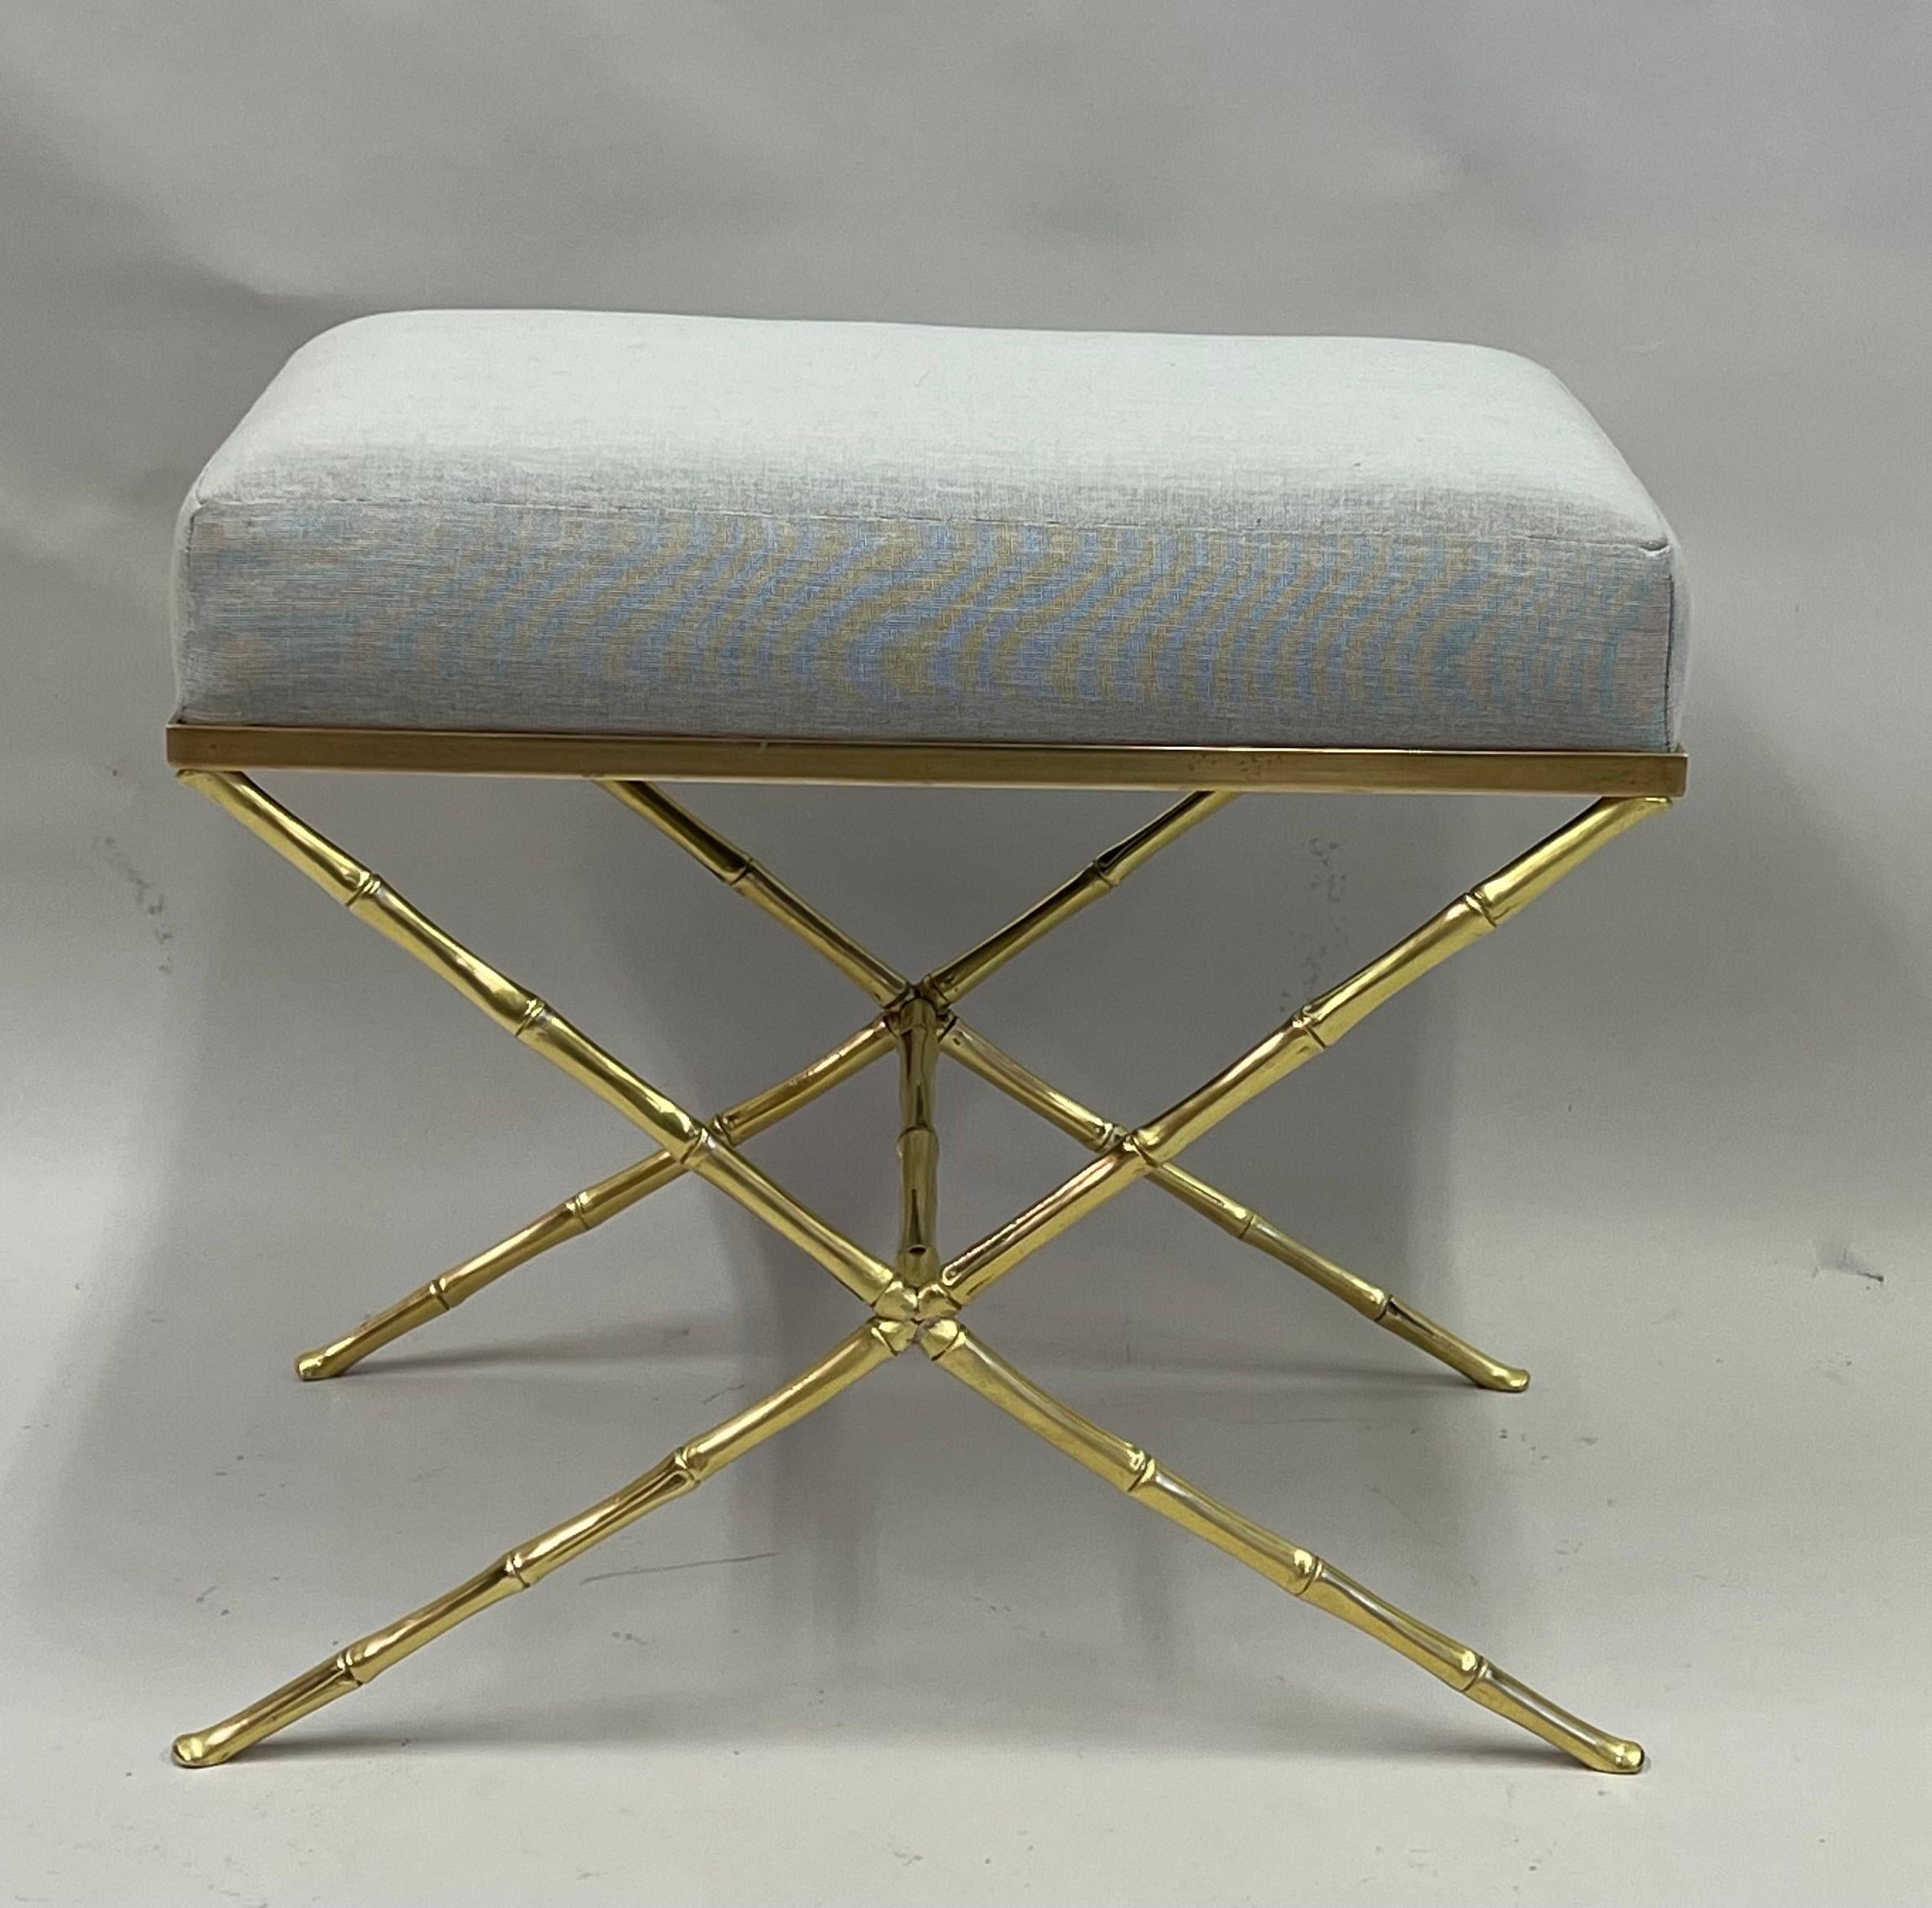 French Mid-Century Modern Neoclassical Brass Faux Bamboo Bench by Maison Baguès For Sale 2